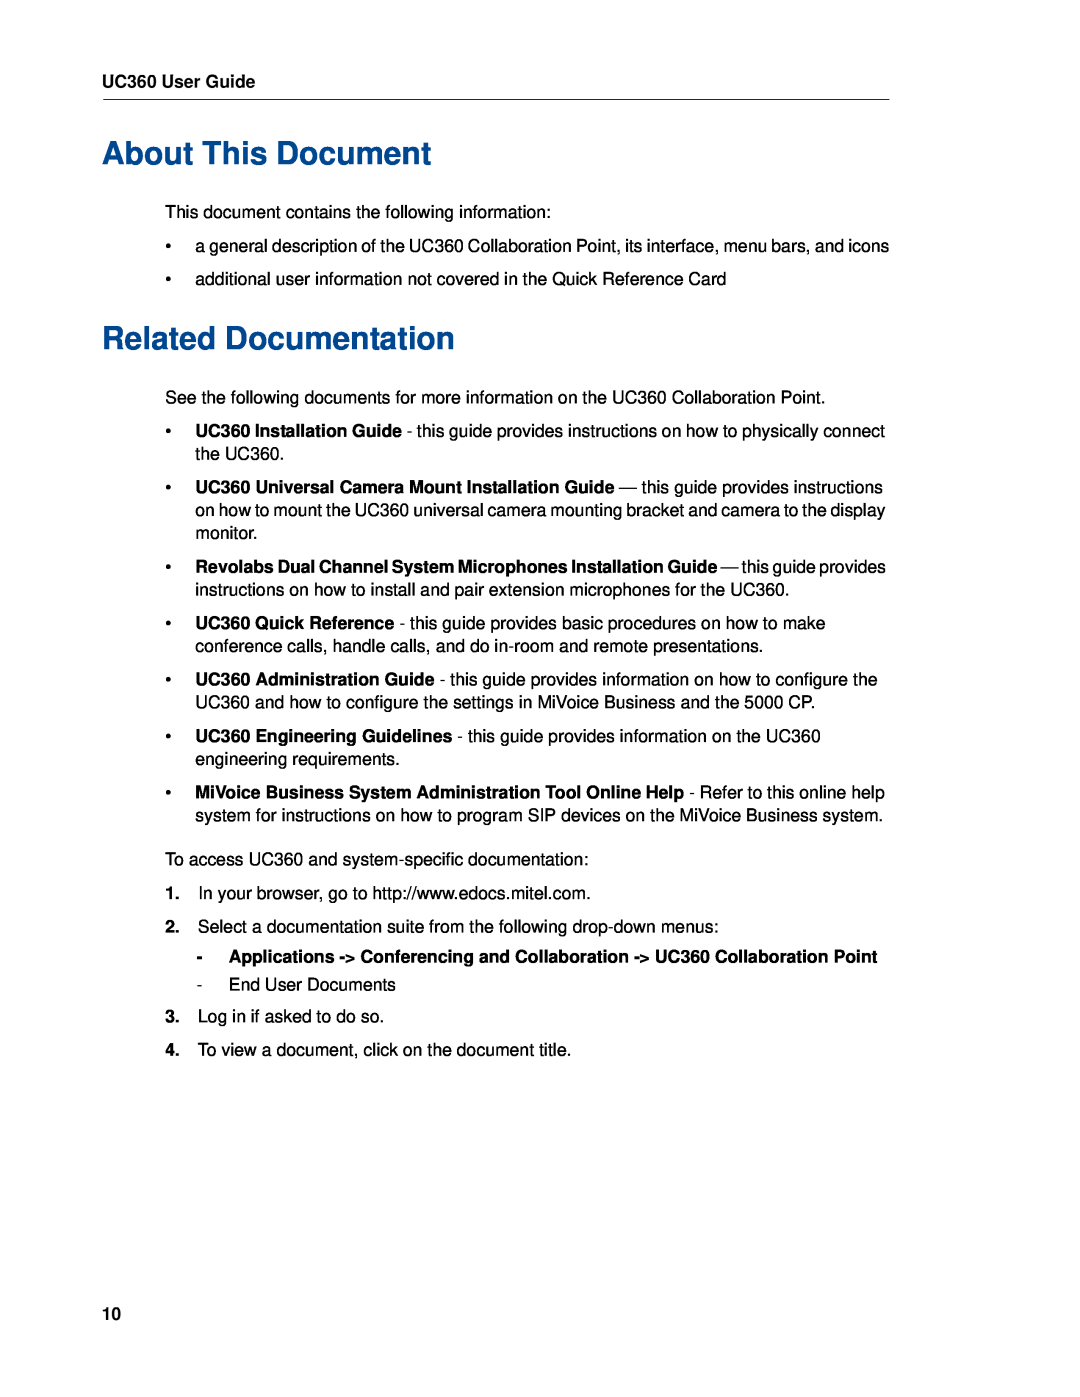 Mitel UC360 manual About This Document, Related Documentation 